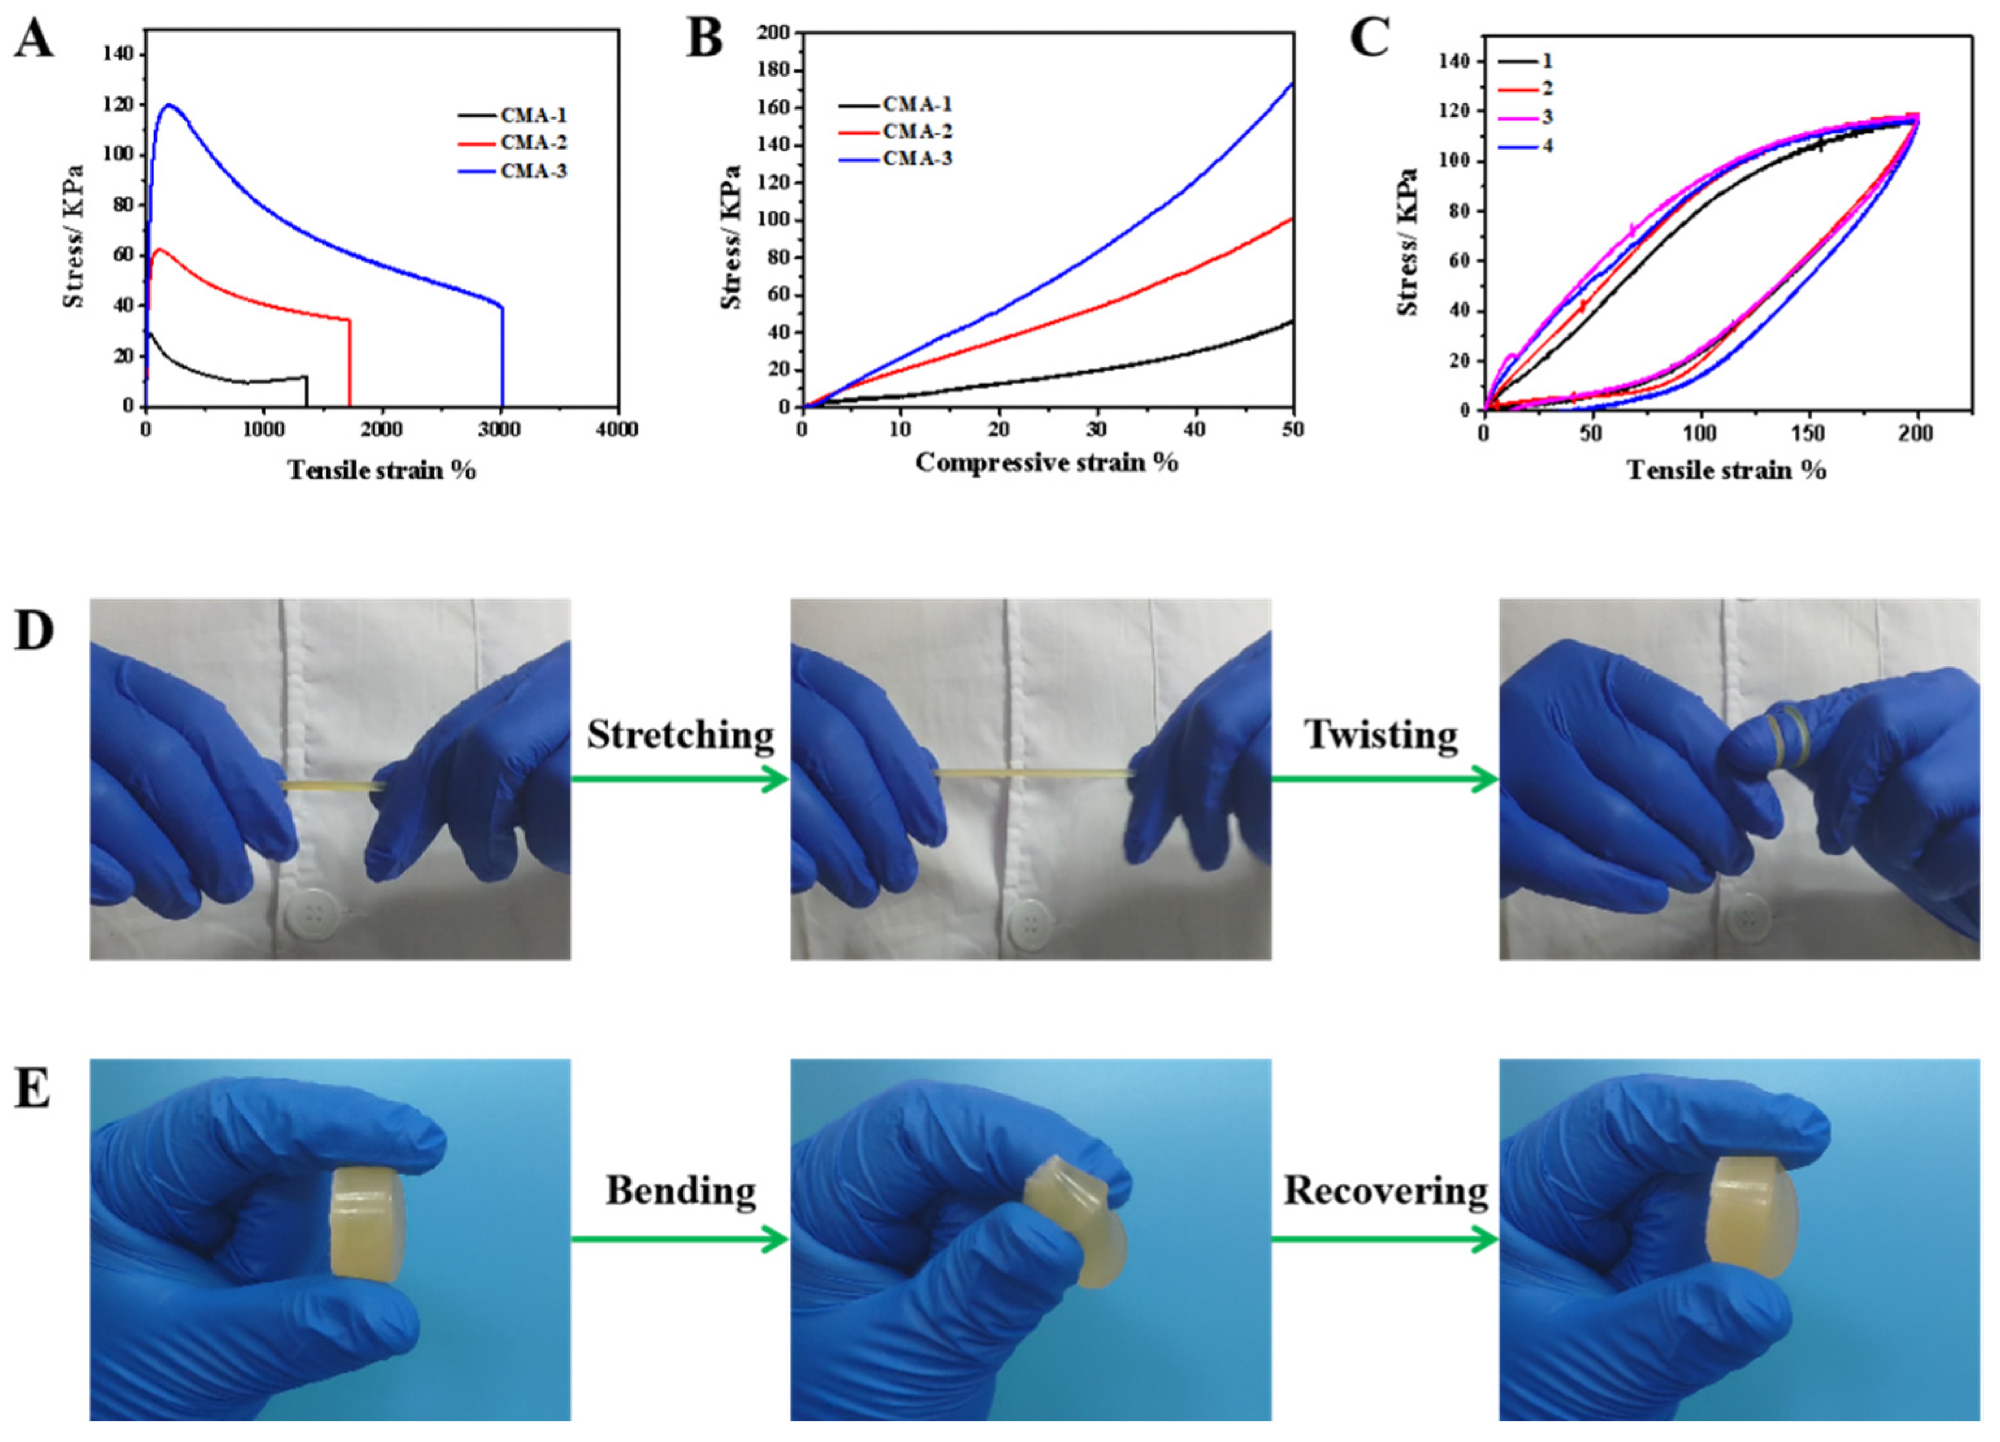 Mechanical properties of CMA hydrogels: (A) Tensile strain curve at 10 mm min-1. (B) Compressive strain curve at 5 mm min-1. (C) Stretching–releasing cycles. Photographs of CMA-3 hydrogel exhibiting excellent stretching and bending flexibility (D,E).